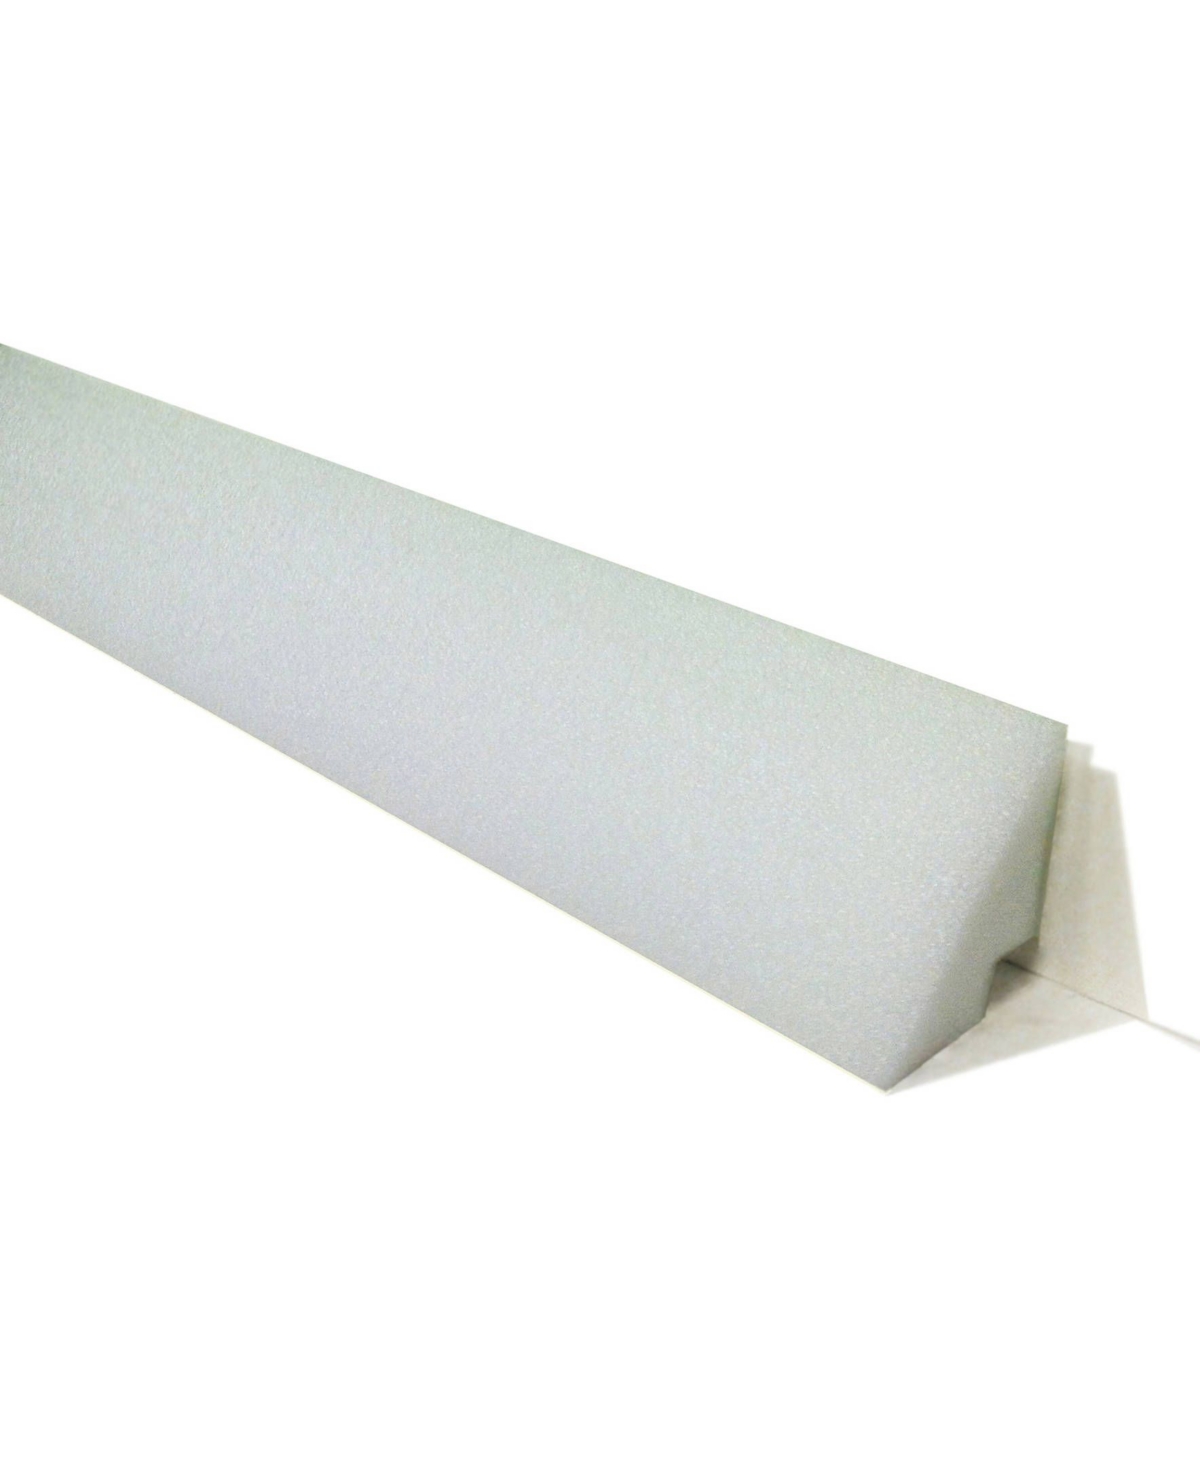 Sports 48" Peel and Stick Above Ground Pool Cover - 12 Pack - White